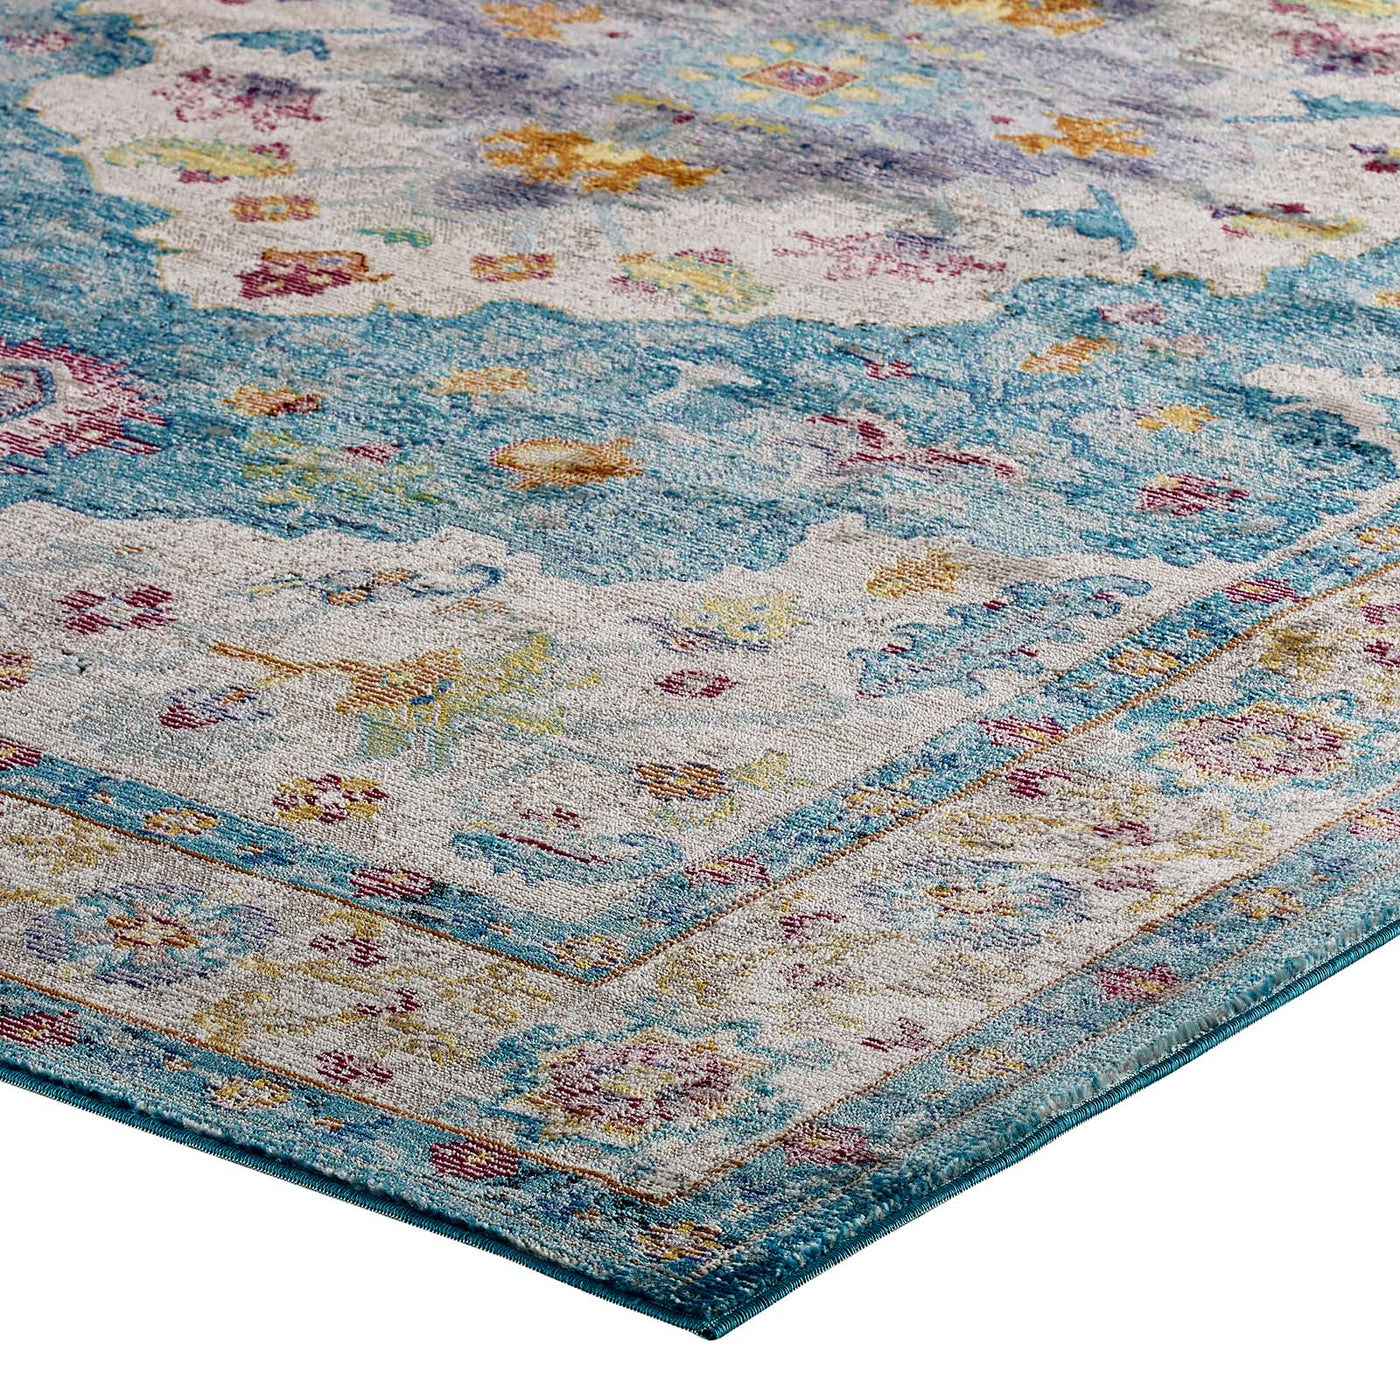 Success Anisah Distressed Floral Persian Medallion 8x10 Area Rug